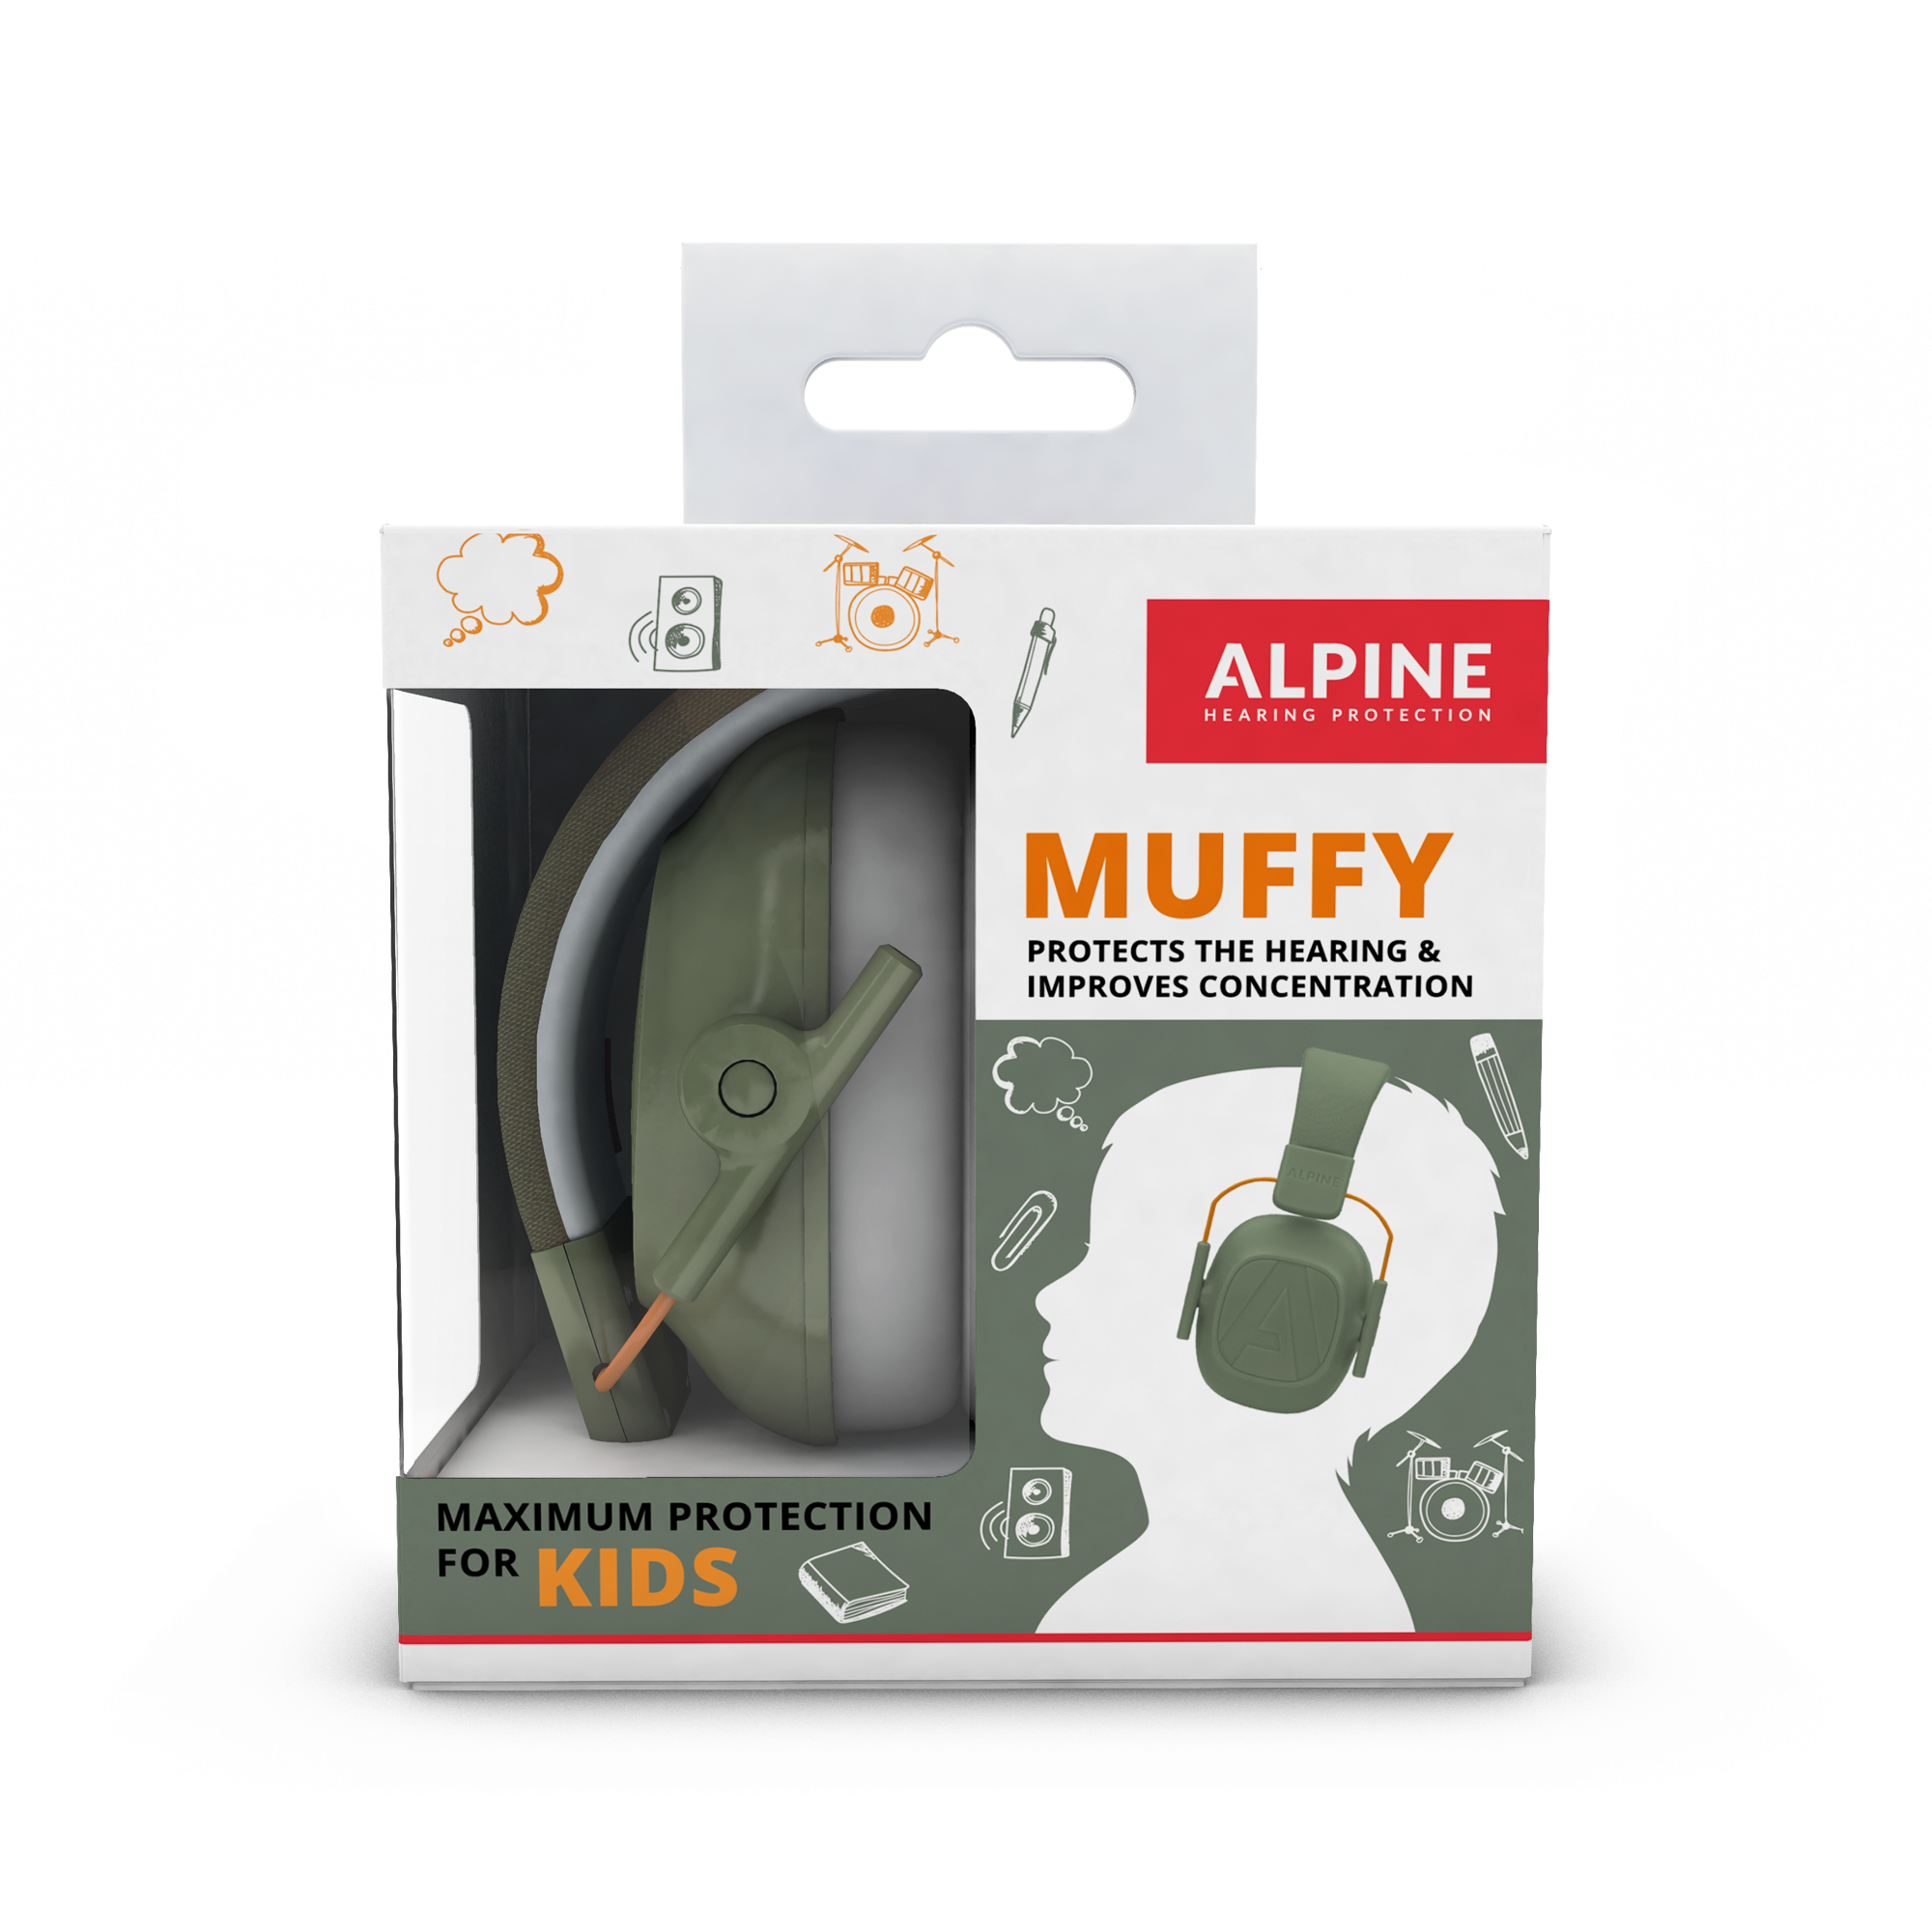 Alpine Muffy Kids hearing protection for kids – Alpine Hearing Protection